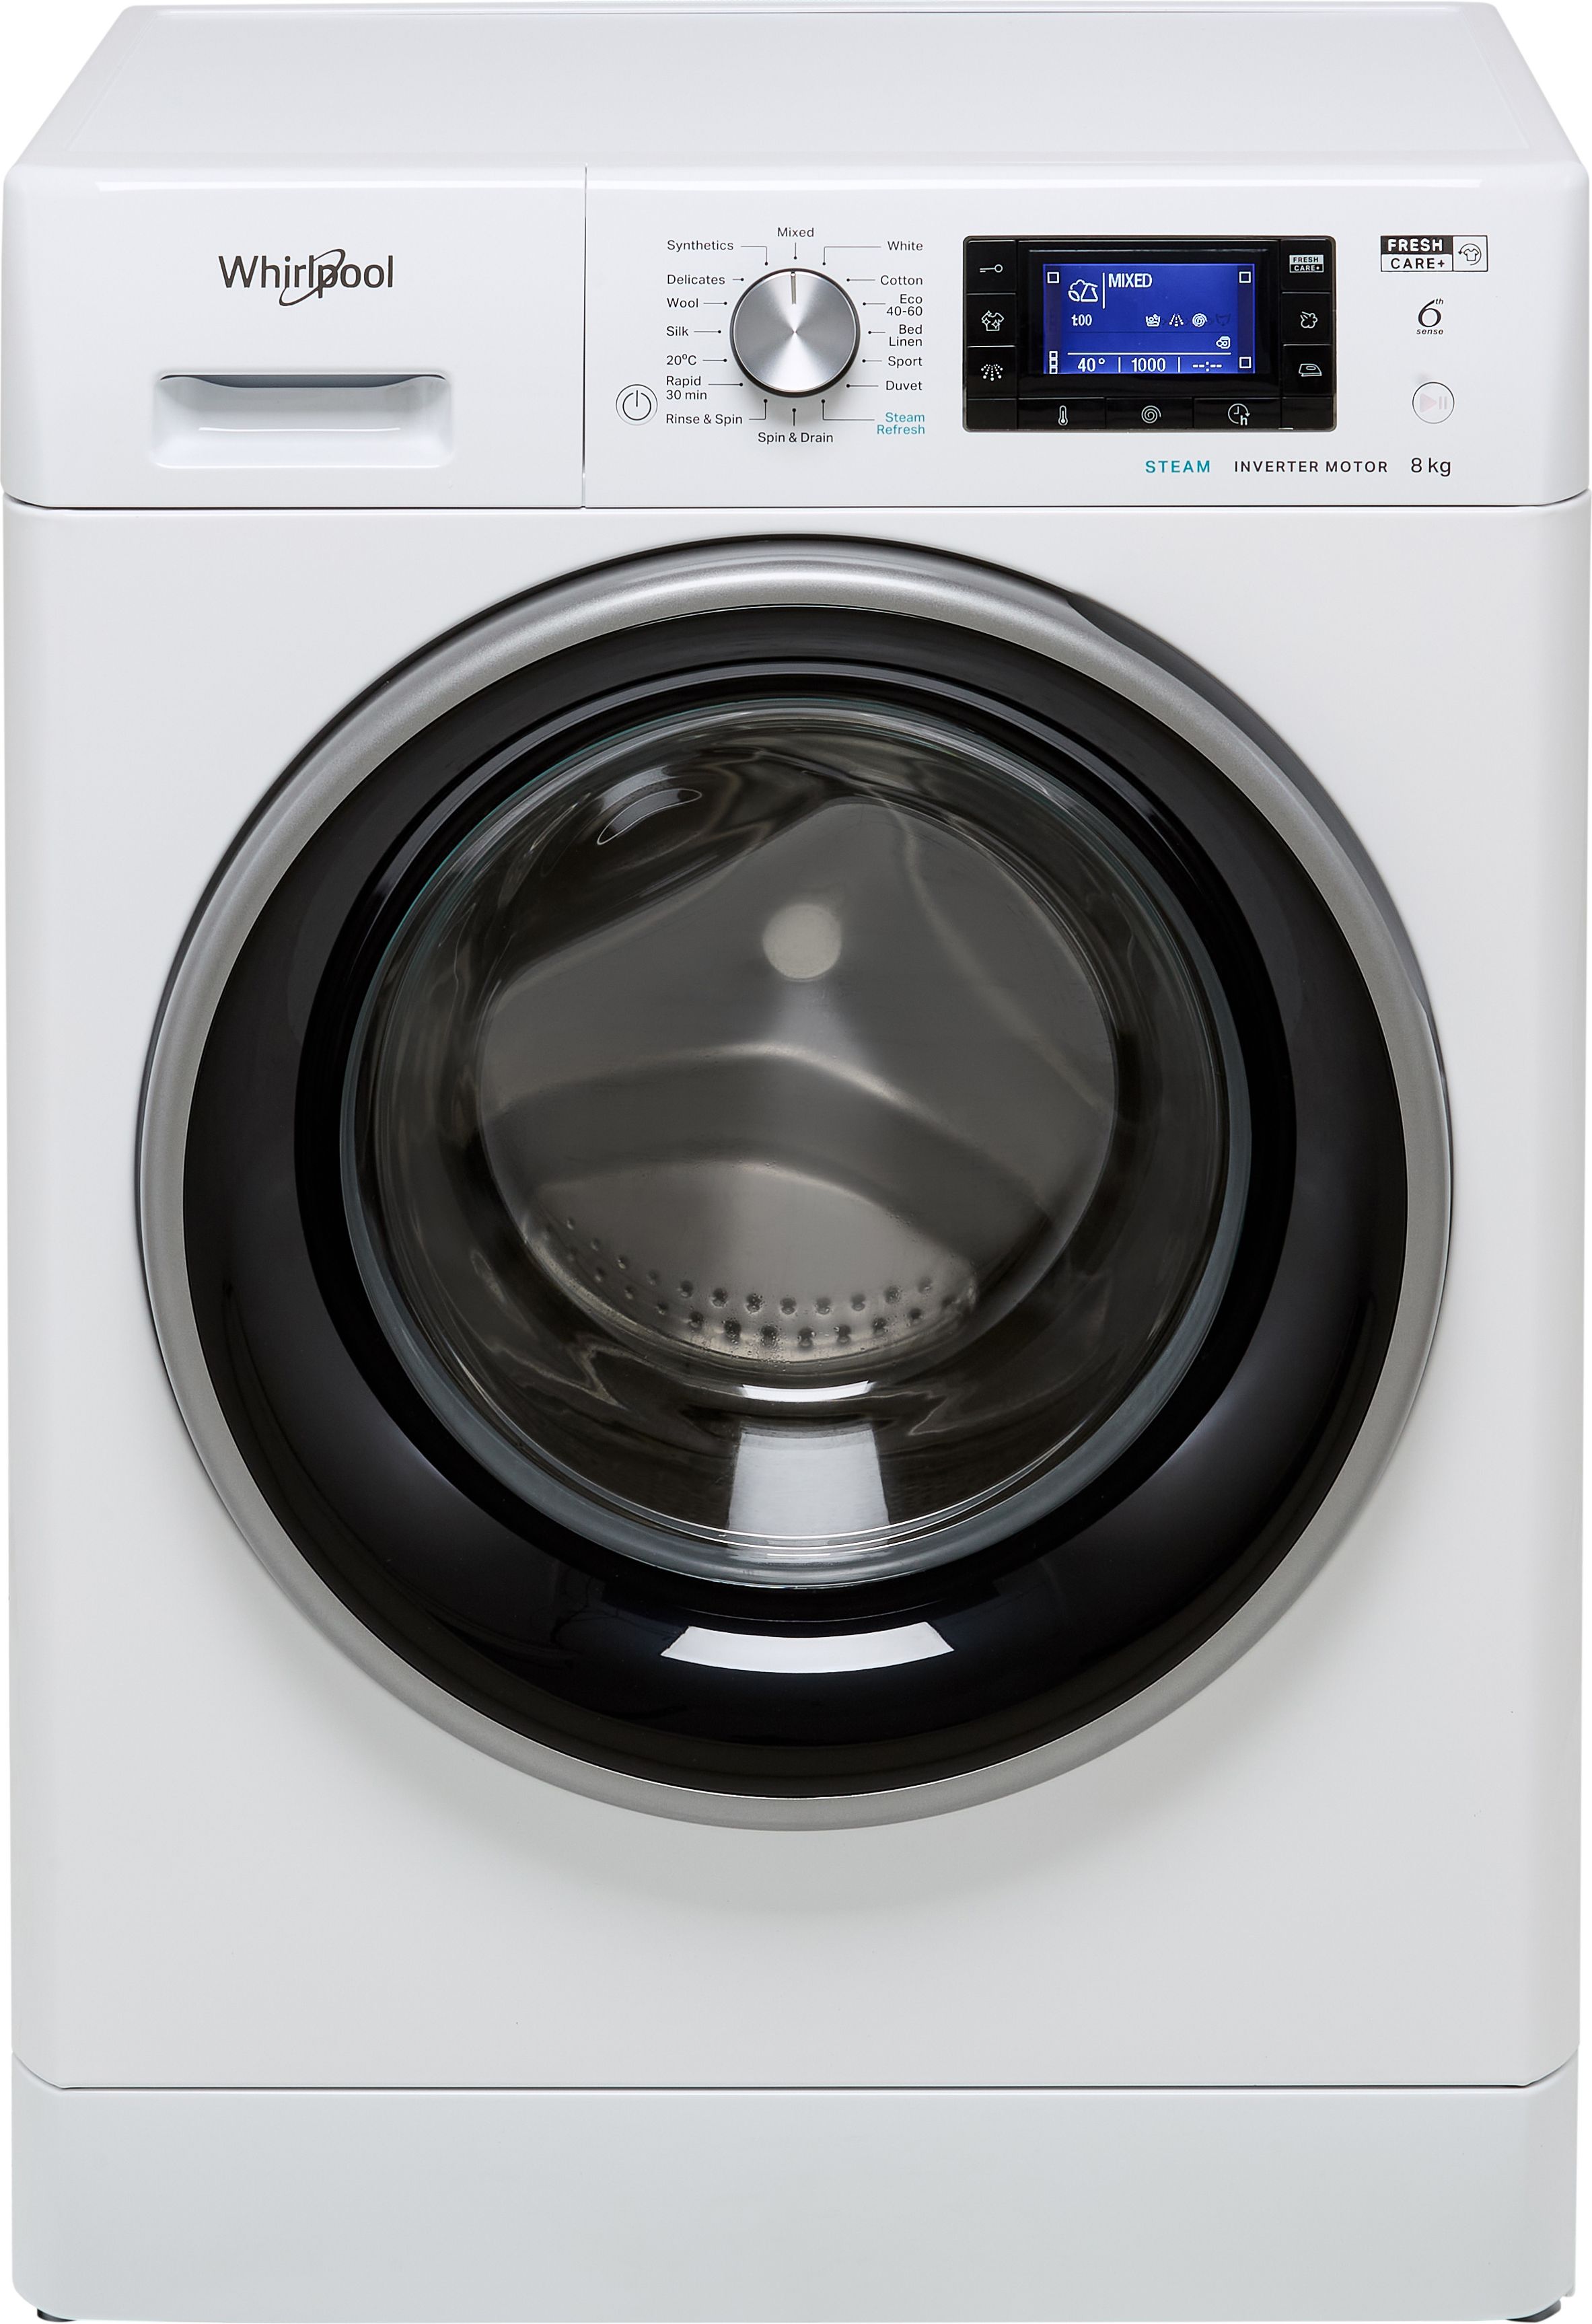 Whirlpool FFD8469BSVUK 8kg Washing Machine with 1400 rpm - White - A Rated, White